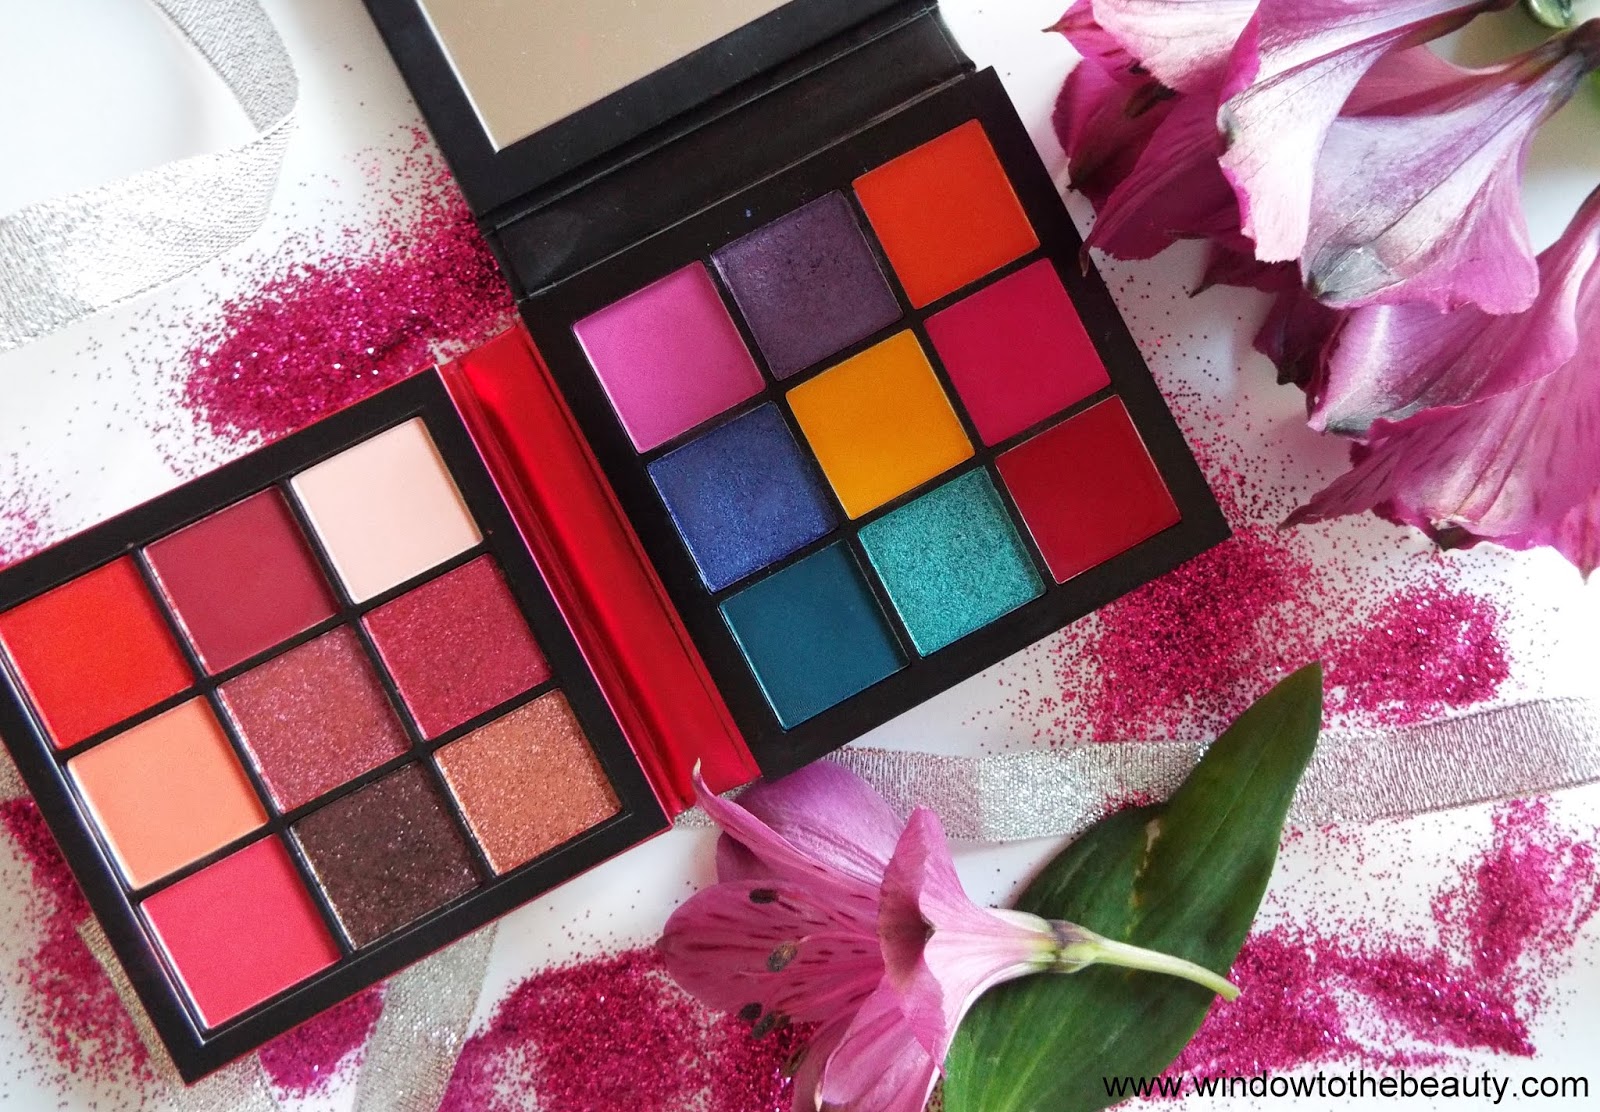 Window to The beauty Huda Beauty Ruby Obsessions Palette